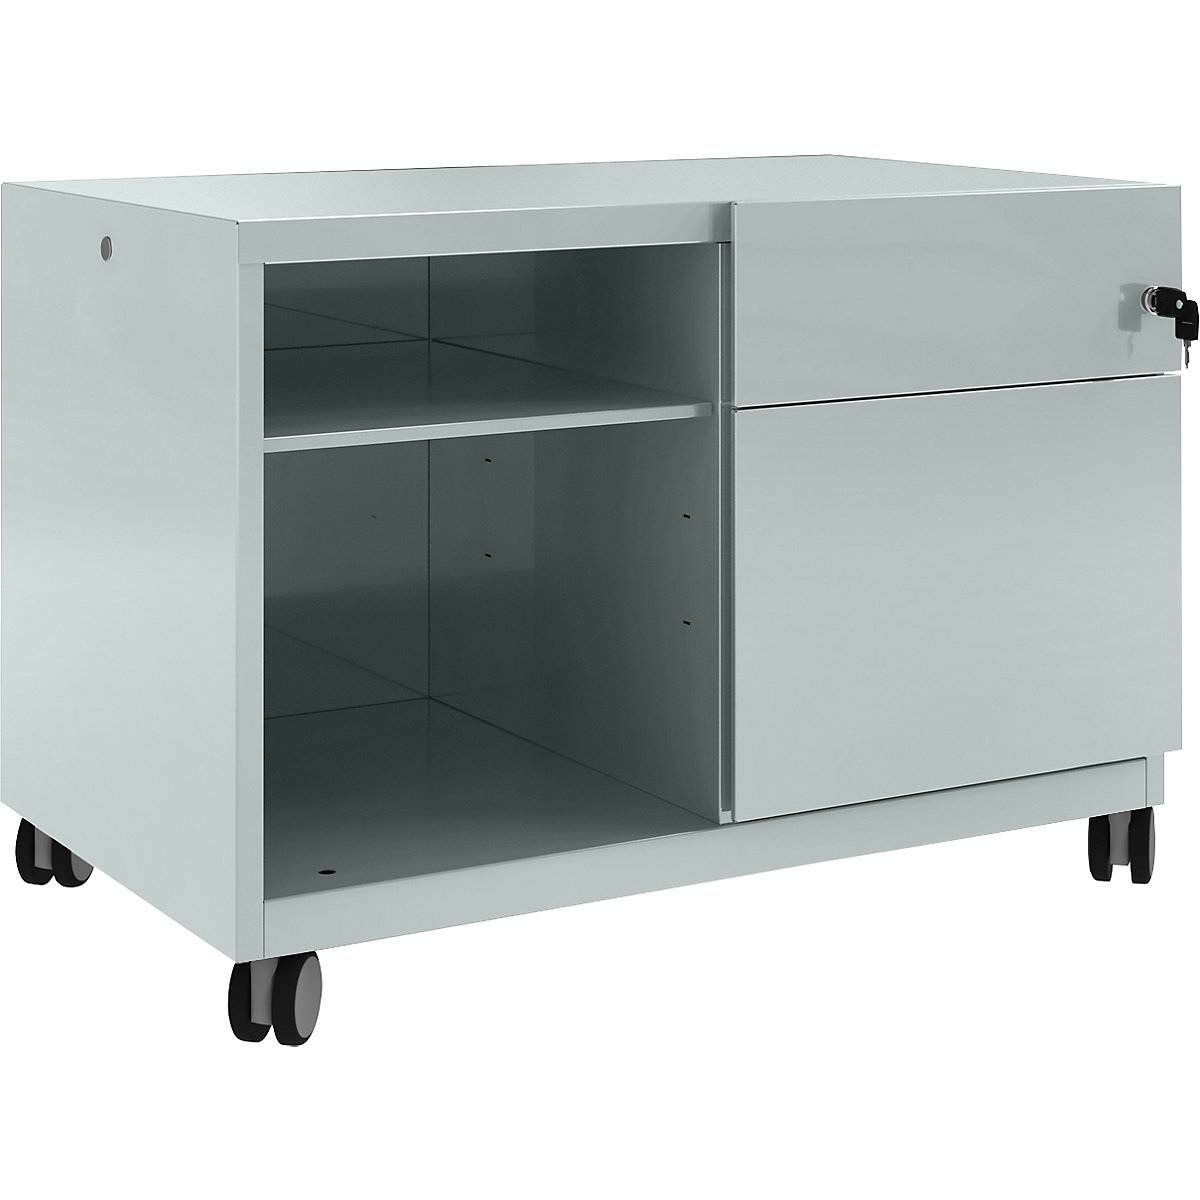 Note™ CADDY, HxBxT 563 x 800 x 490 mm – BISLEY, 1 universal drawer and suspension file drawer on the right, silver-13